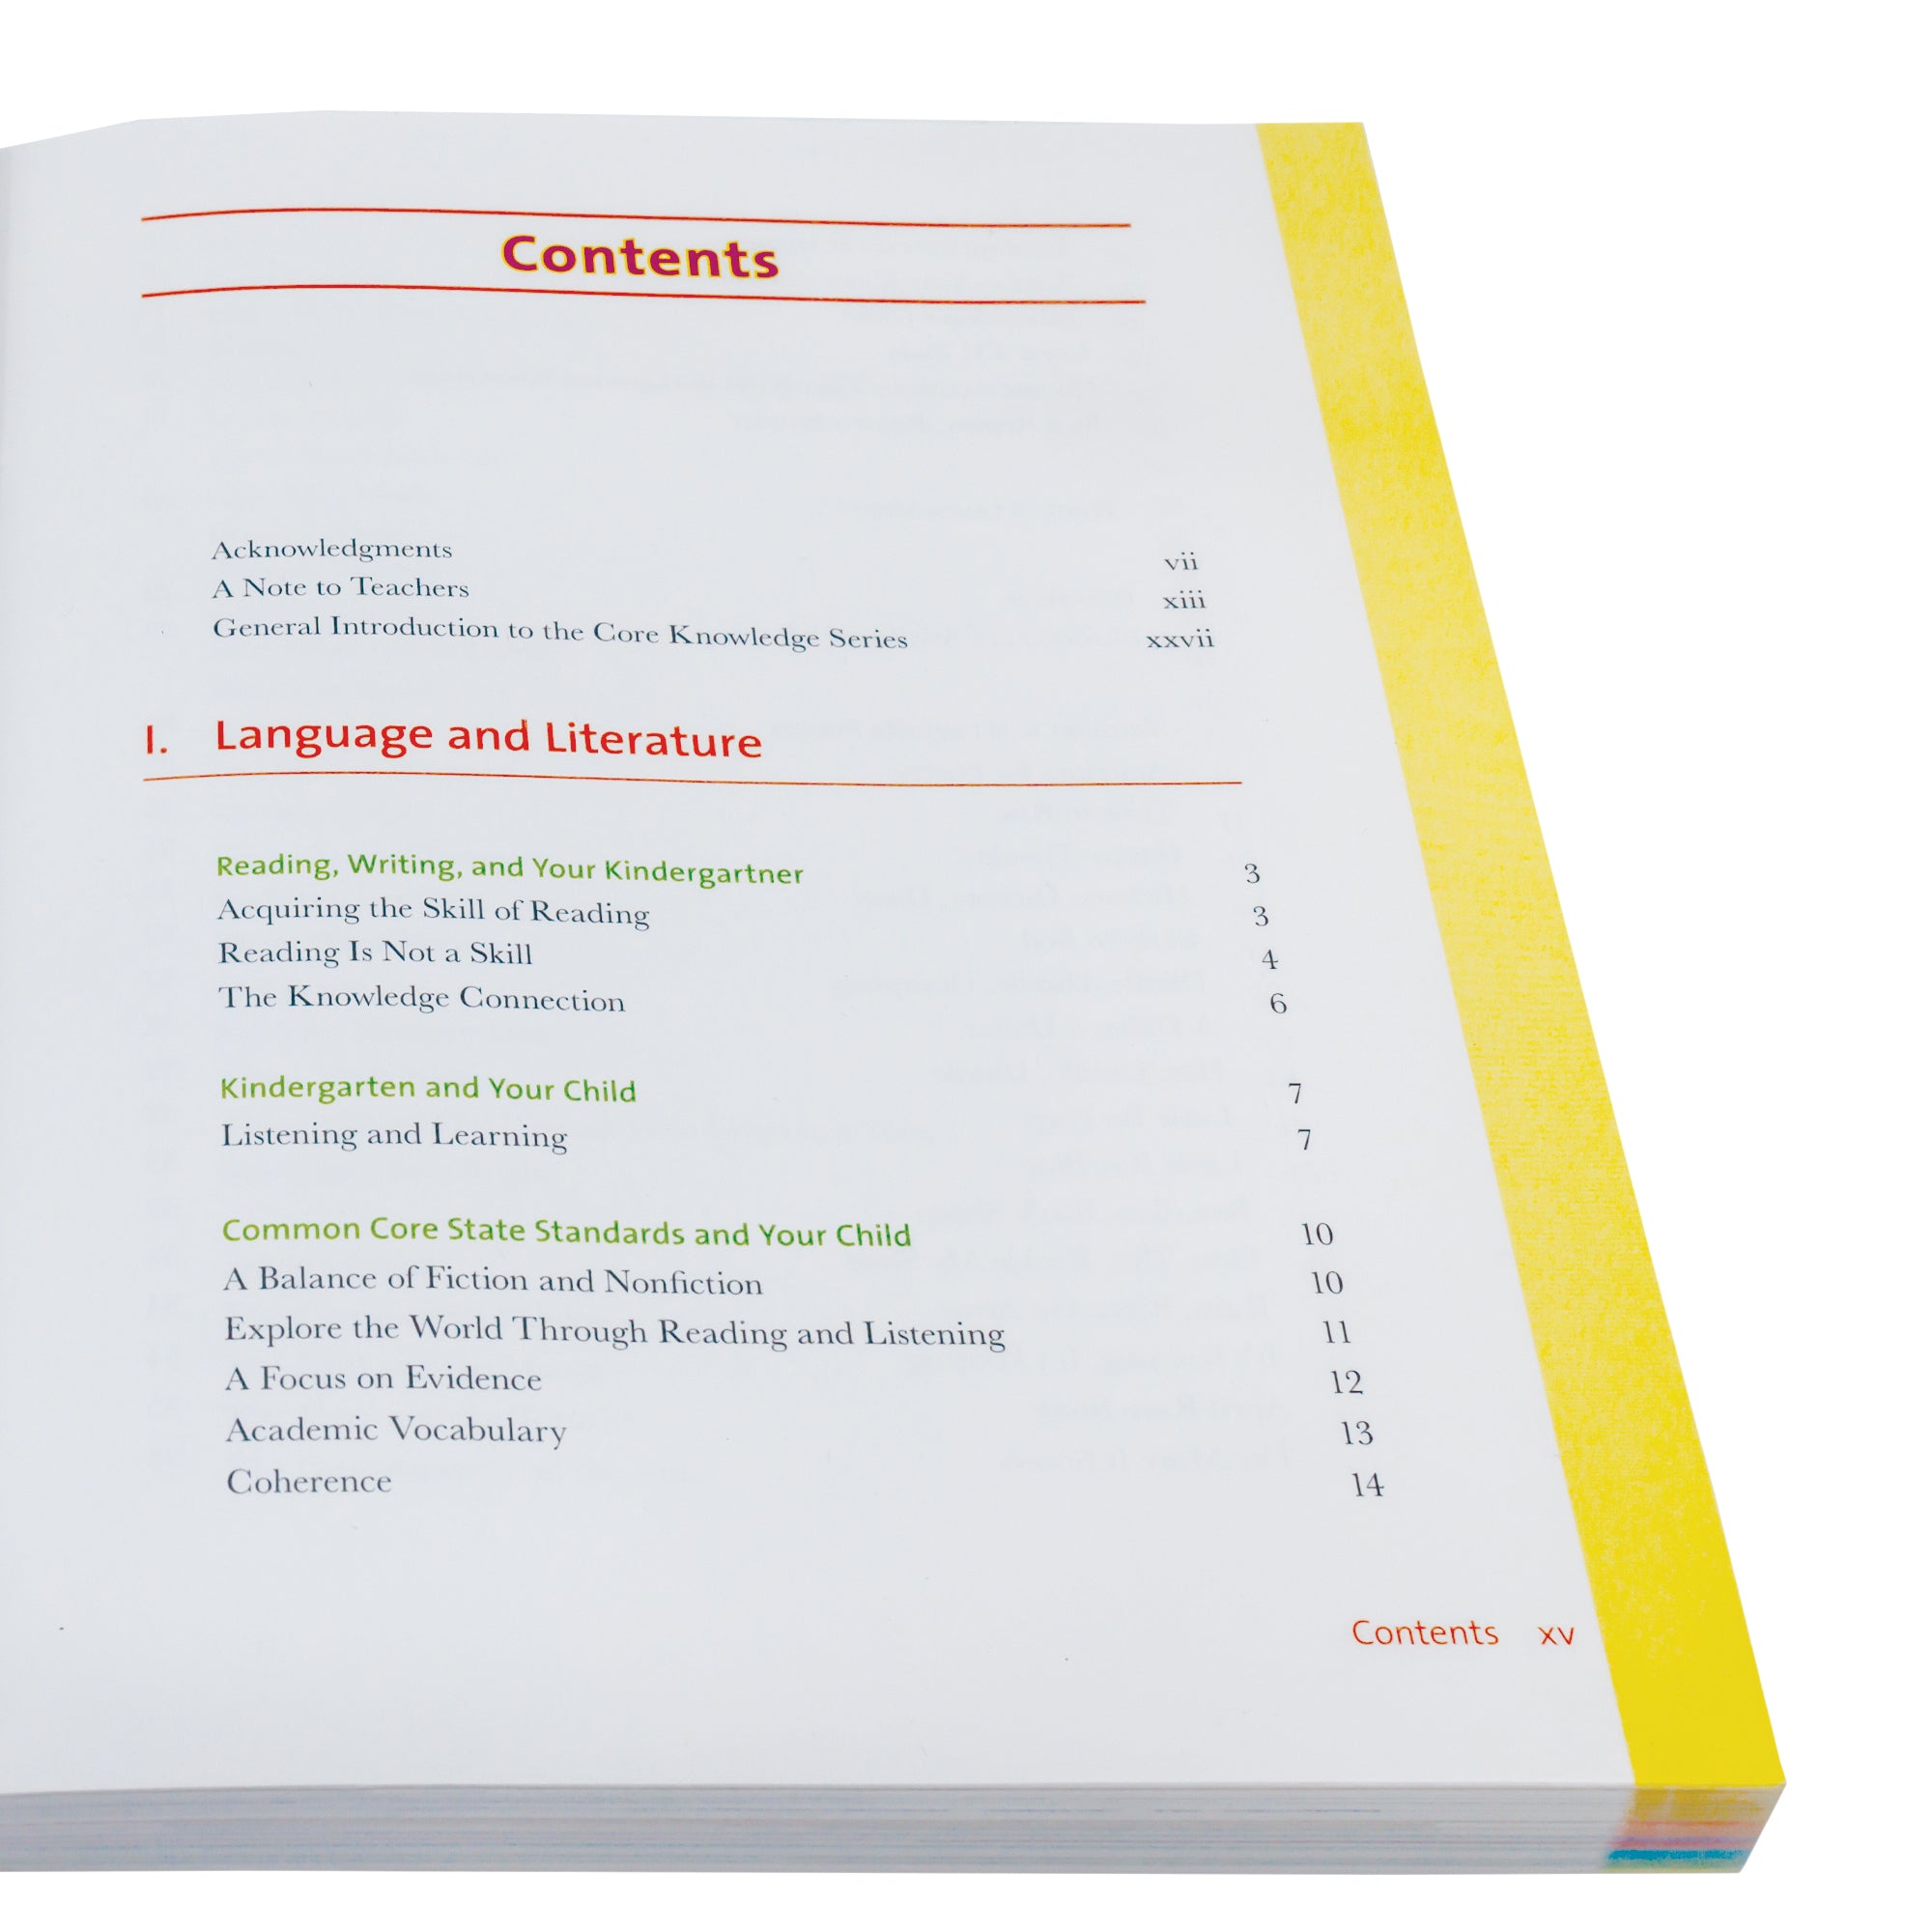 The What Your Kindergartener Needs to Know book open to show the contents on a white page with a yellow boarder along the outside of the page. The titles are red with subsection titles in green and black for the parts. Section 1 is titled “Language and Literature.”